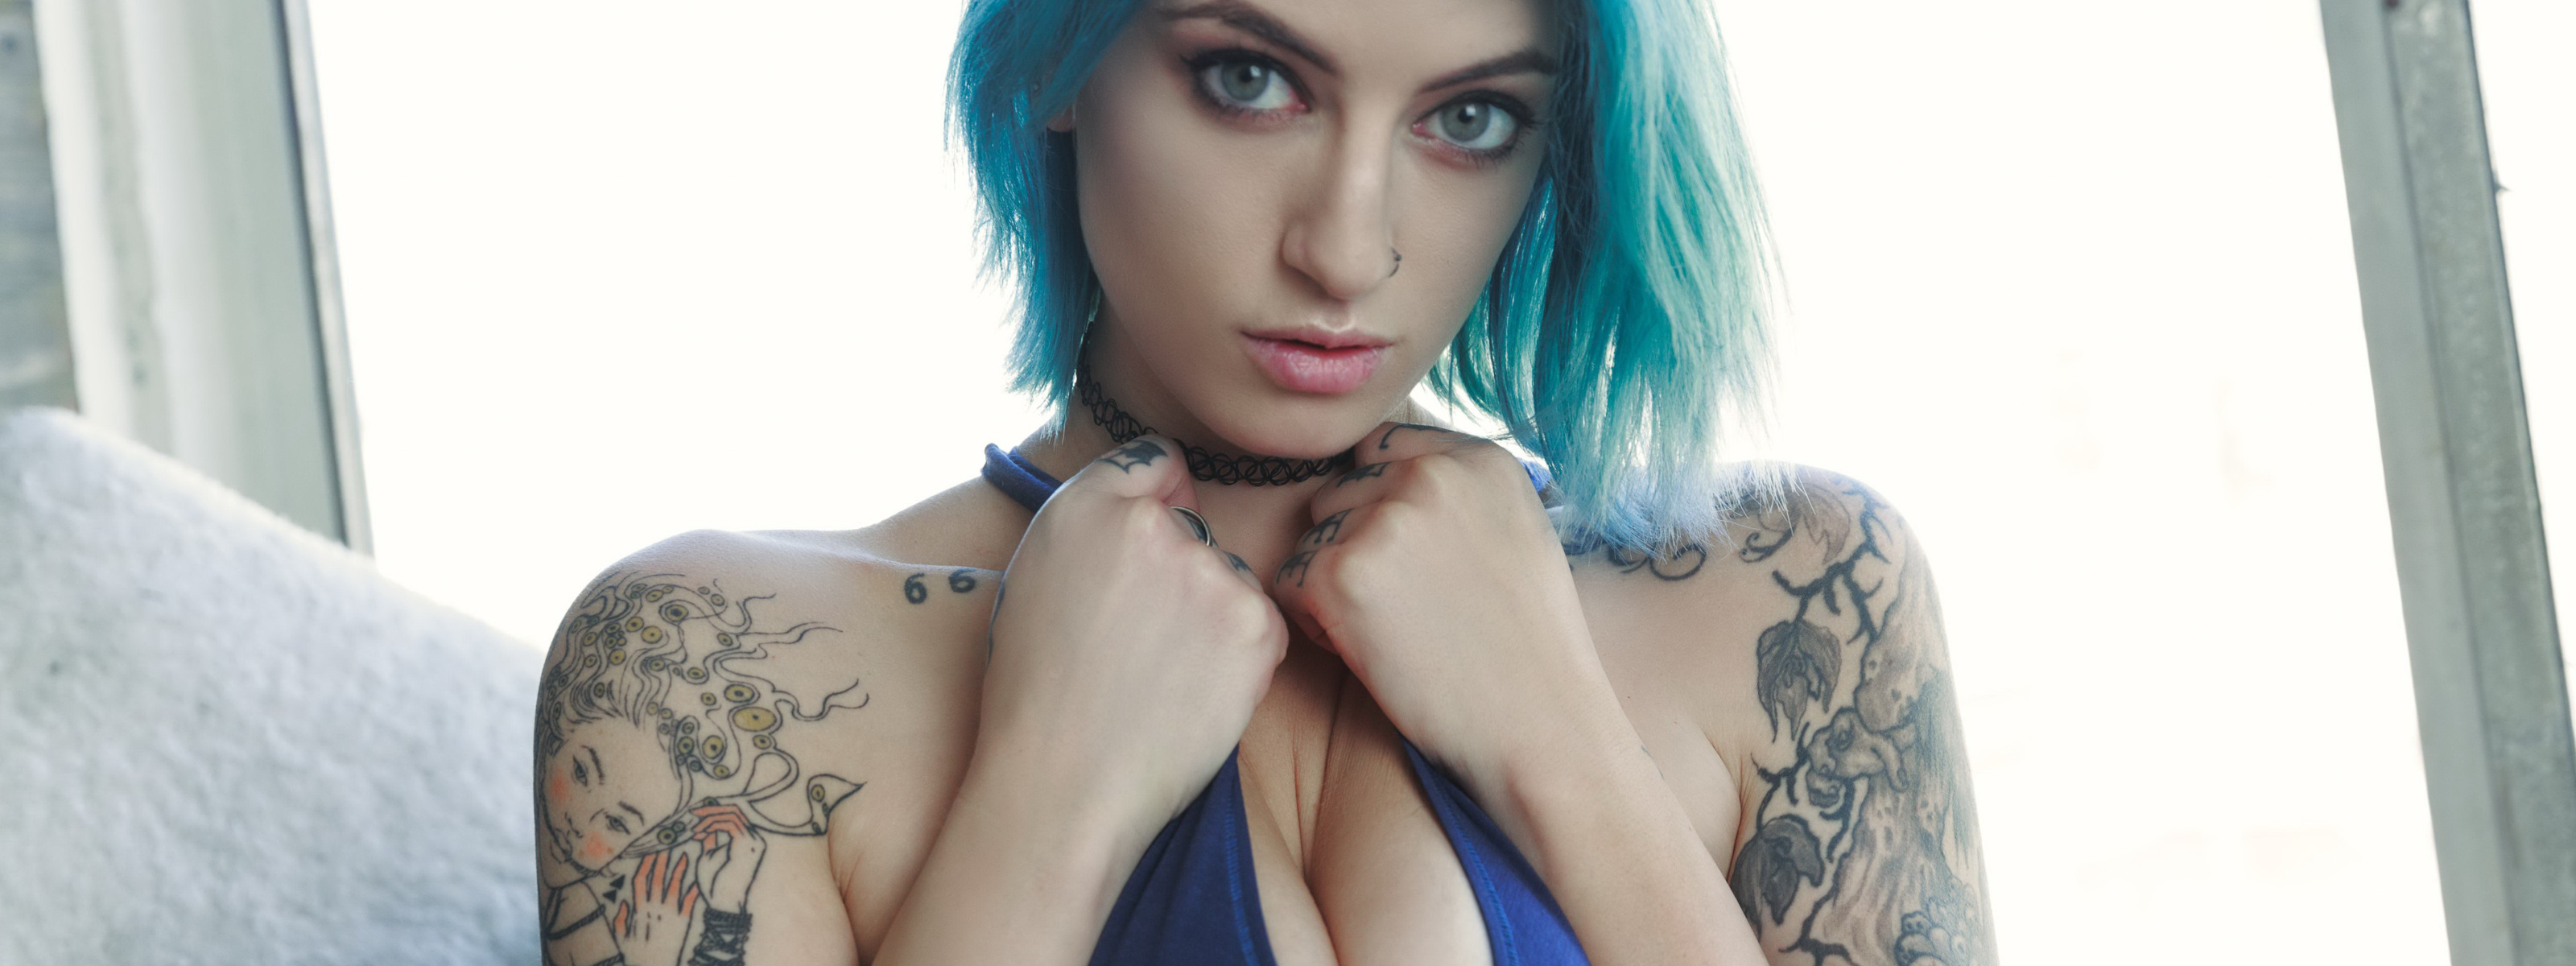 Emmy suicide leaked